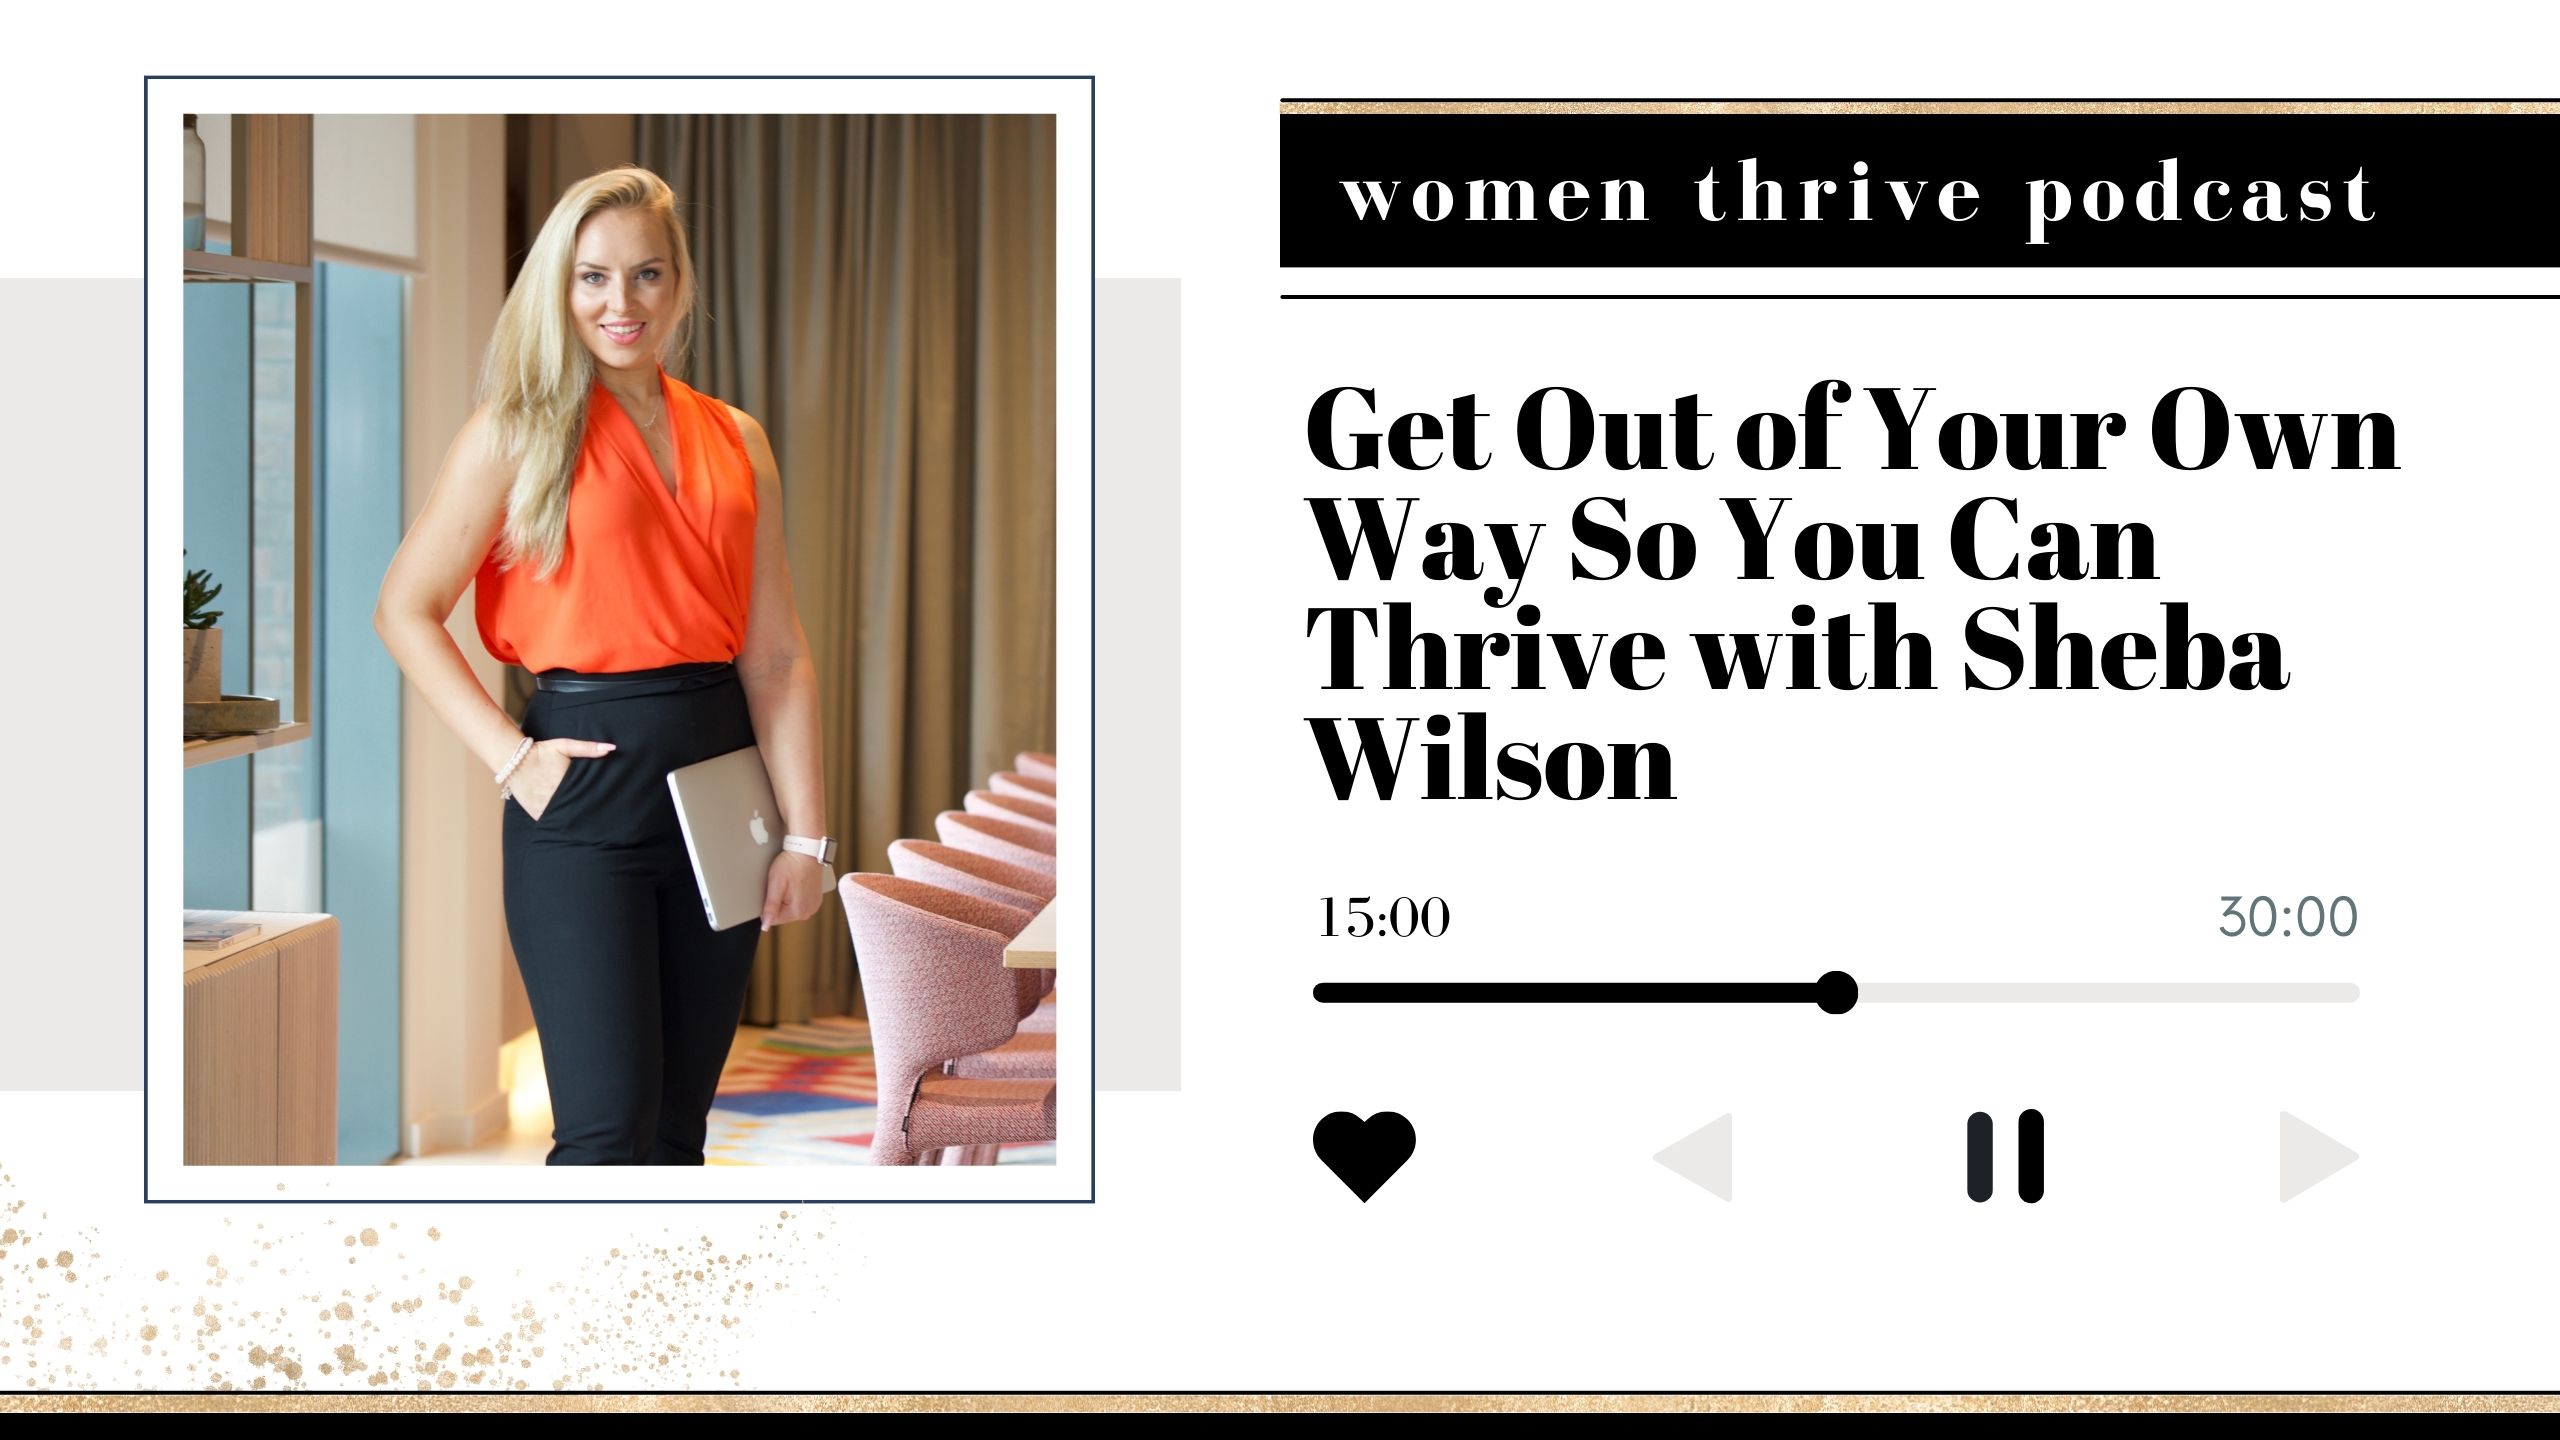 Get Out of Your Own Way So You Can Thrive with Sheba Wilson